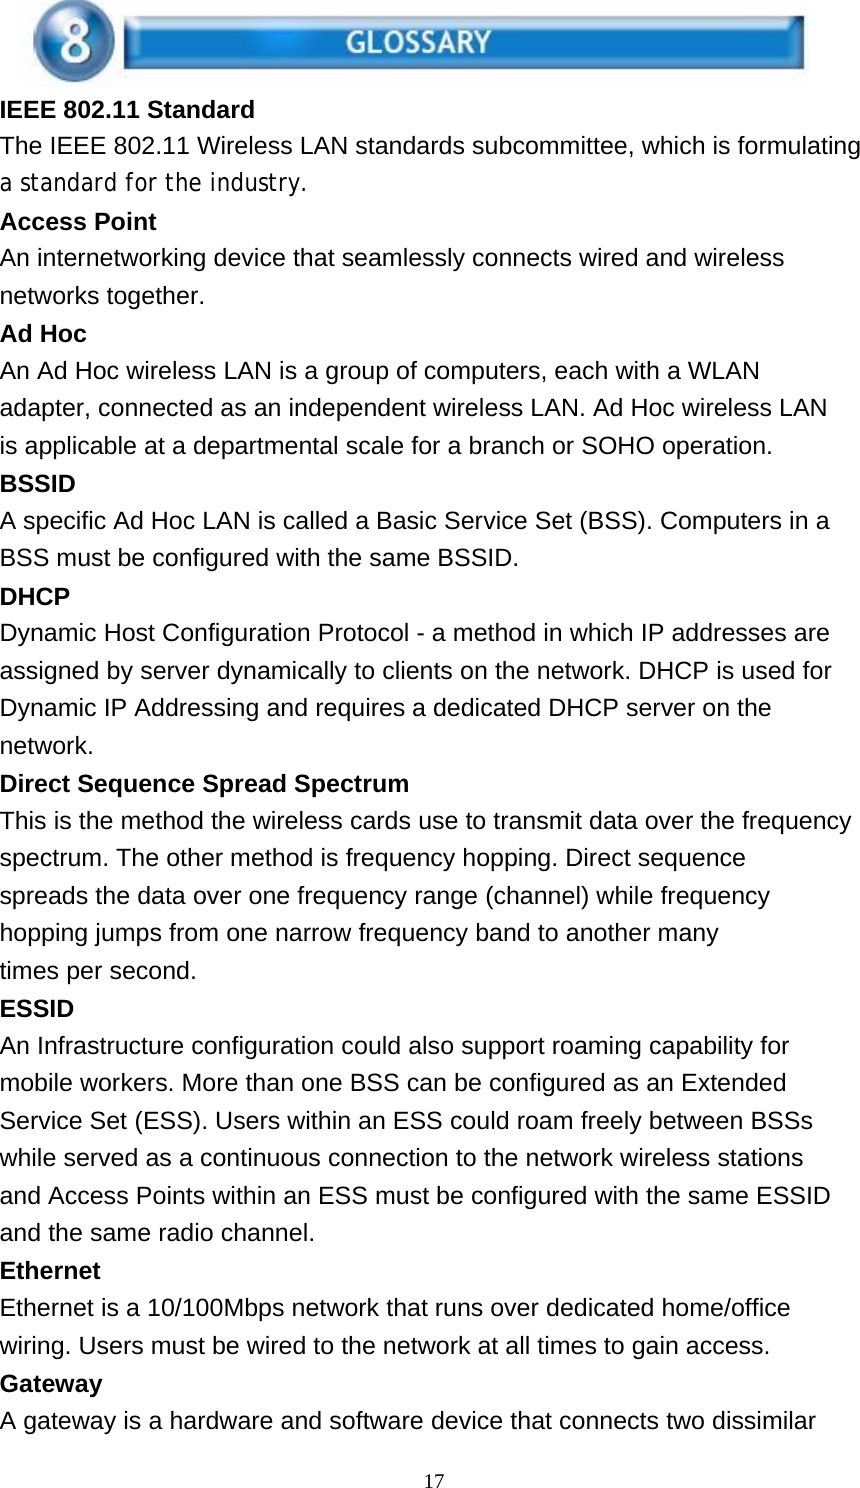 17    IEEE 802.11 Standard The IEEE 802.11 Wireless LAN standards subcommittee, which is formulating a standard for the industry. Access Point An internetworking device that seamlessly connects wired and wireless networks together. Ad Hoc An Ad Hoc wireless LAN is a group of computers, each with a WLAN adapter, connected as an independent wireless LAN. Ad Hoc wireless LAN is applicable at a departmental scale for a branch or SOHO operation. BSSID A specific Ad Hoc LAN is called a Basic Service Set (BSS). Computers in a BSS must be configured with the same BSSID. DHCP Dynamic Host Configuration Protocol - a method in which IP addresses are assigned by server dynamically to clients on the network. DHCP is used for Dynamic IP Addressing and requires a dedicated DHCP server on the network. Direct Sequence Spread Spectrum This is the method the wireless cards use to transmit data over the frequency spectrum. The other method is frequency hopping. Direct sequence spreads the data over one frequency range (channel) while frequency hopping jumps from one narrow frequency band to another many times per second. ESSID An Infrastructure configuration could also support roaming capability for mobile workers. More than one BSS can be configured as an Extended Service Set (ESS). Users within an ESS could roam freely between BSSs while served as a continuous connection to the network wireless stations and Access Points within an ESS must be configured with the same ESSID and the same radio channel. Ethernet Ethernet is a 10/100Mbps network that runs over dedicated home/office wiring. Users must be wired to the network at all times to gain access. Gateway A gateway is a hardware and software device that connects two dissimilar 